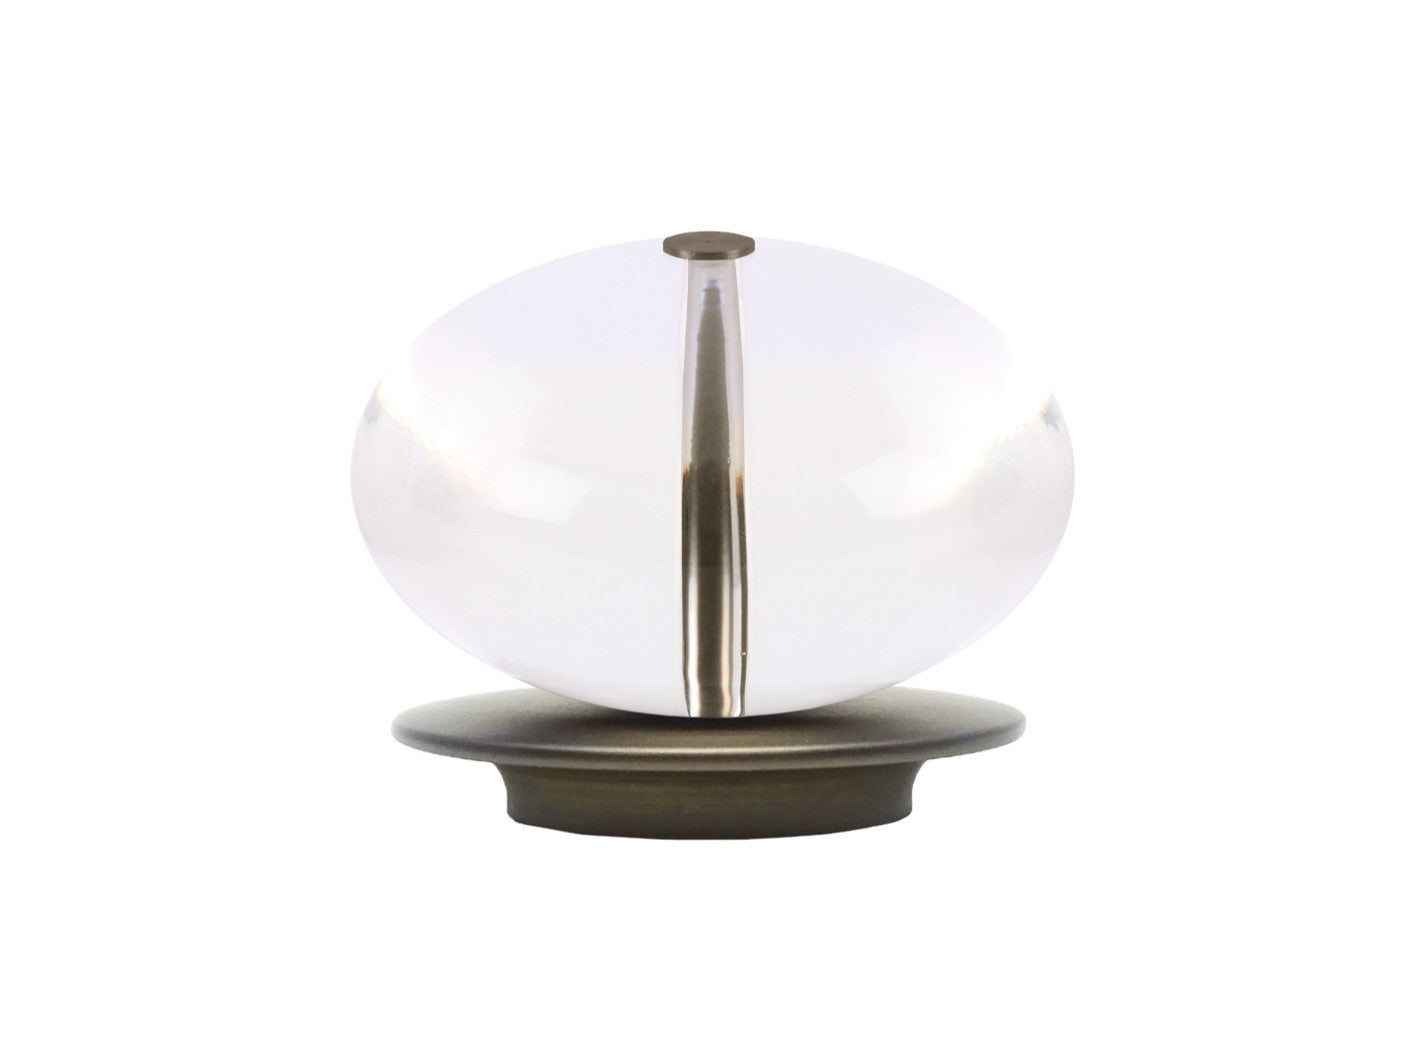 Acrylic ellipse finial in brushed bronze curtain pole end